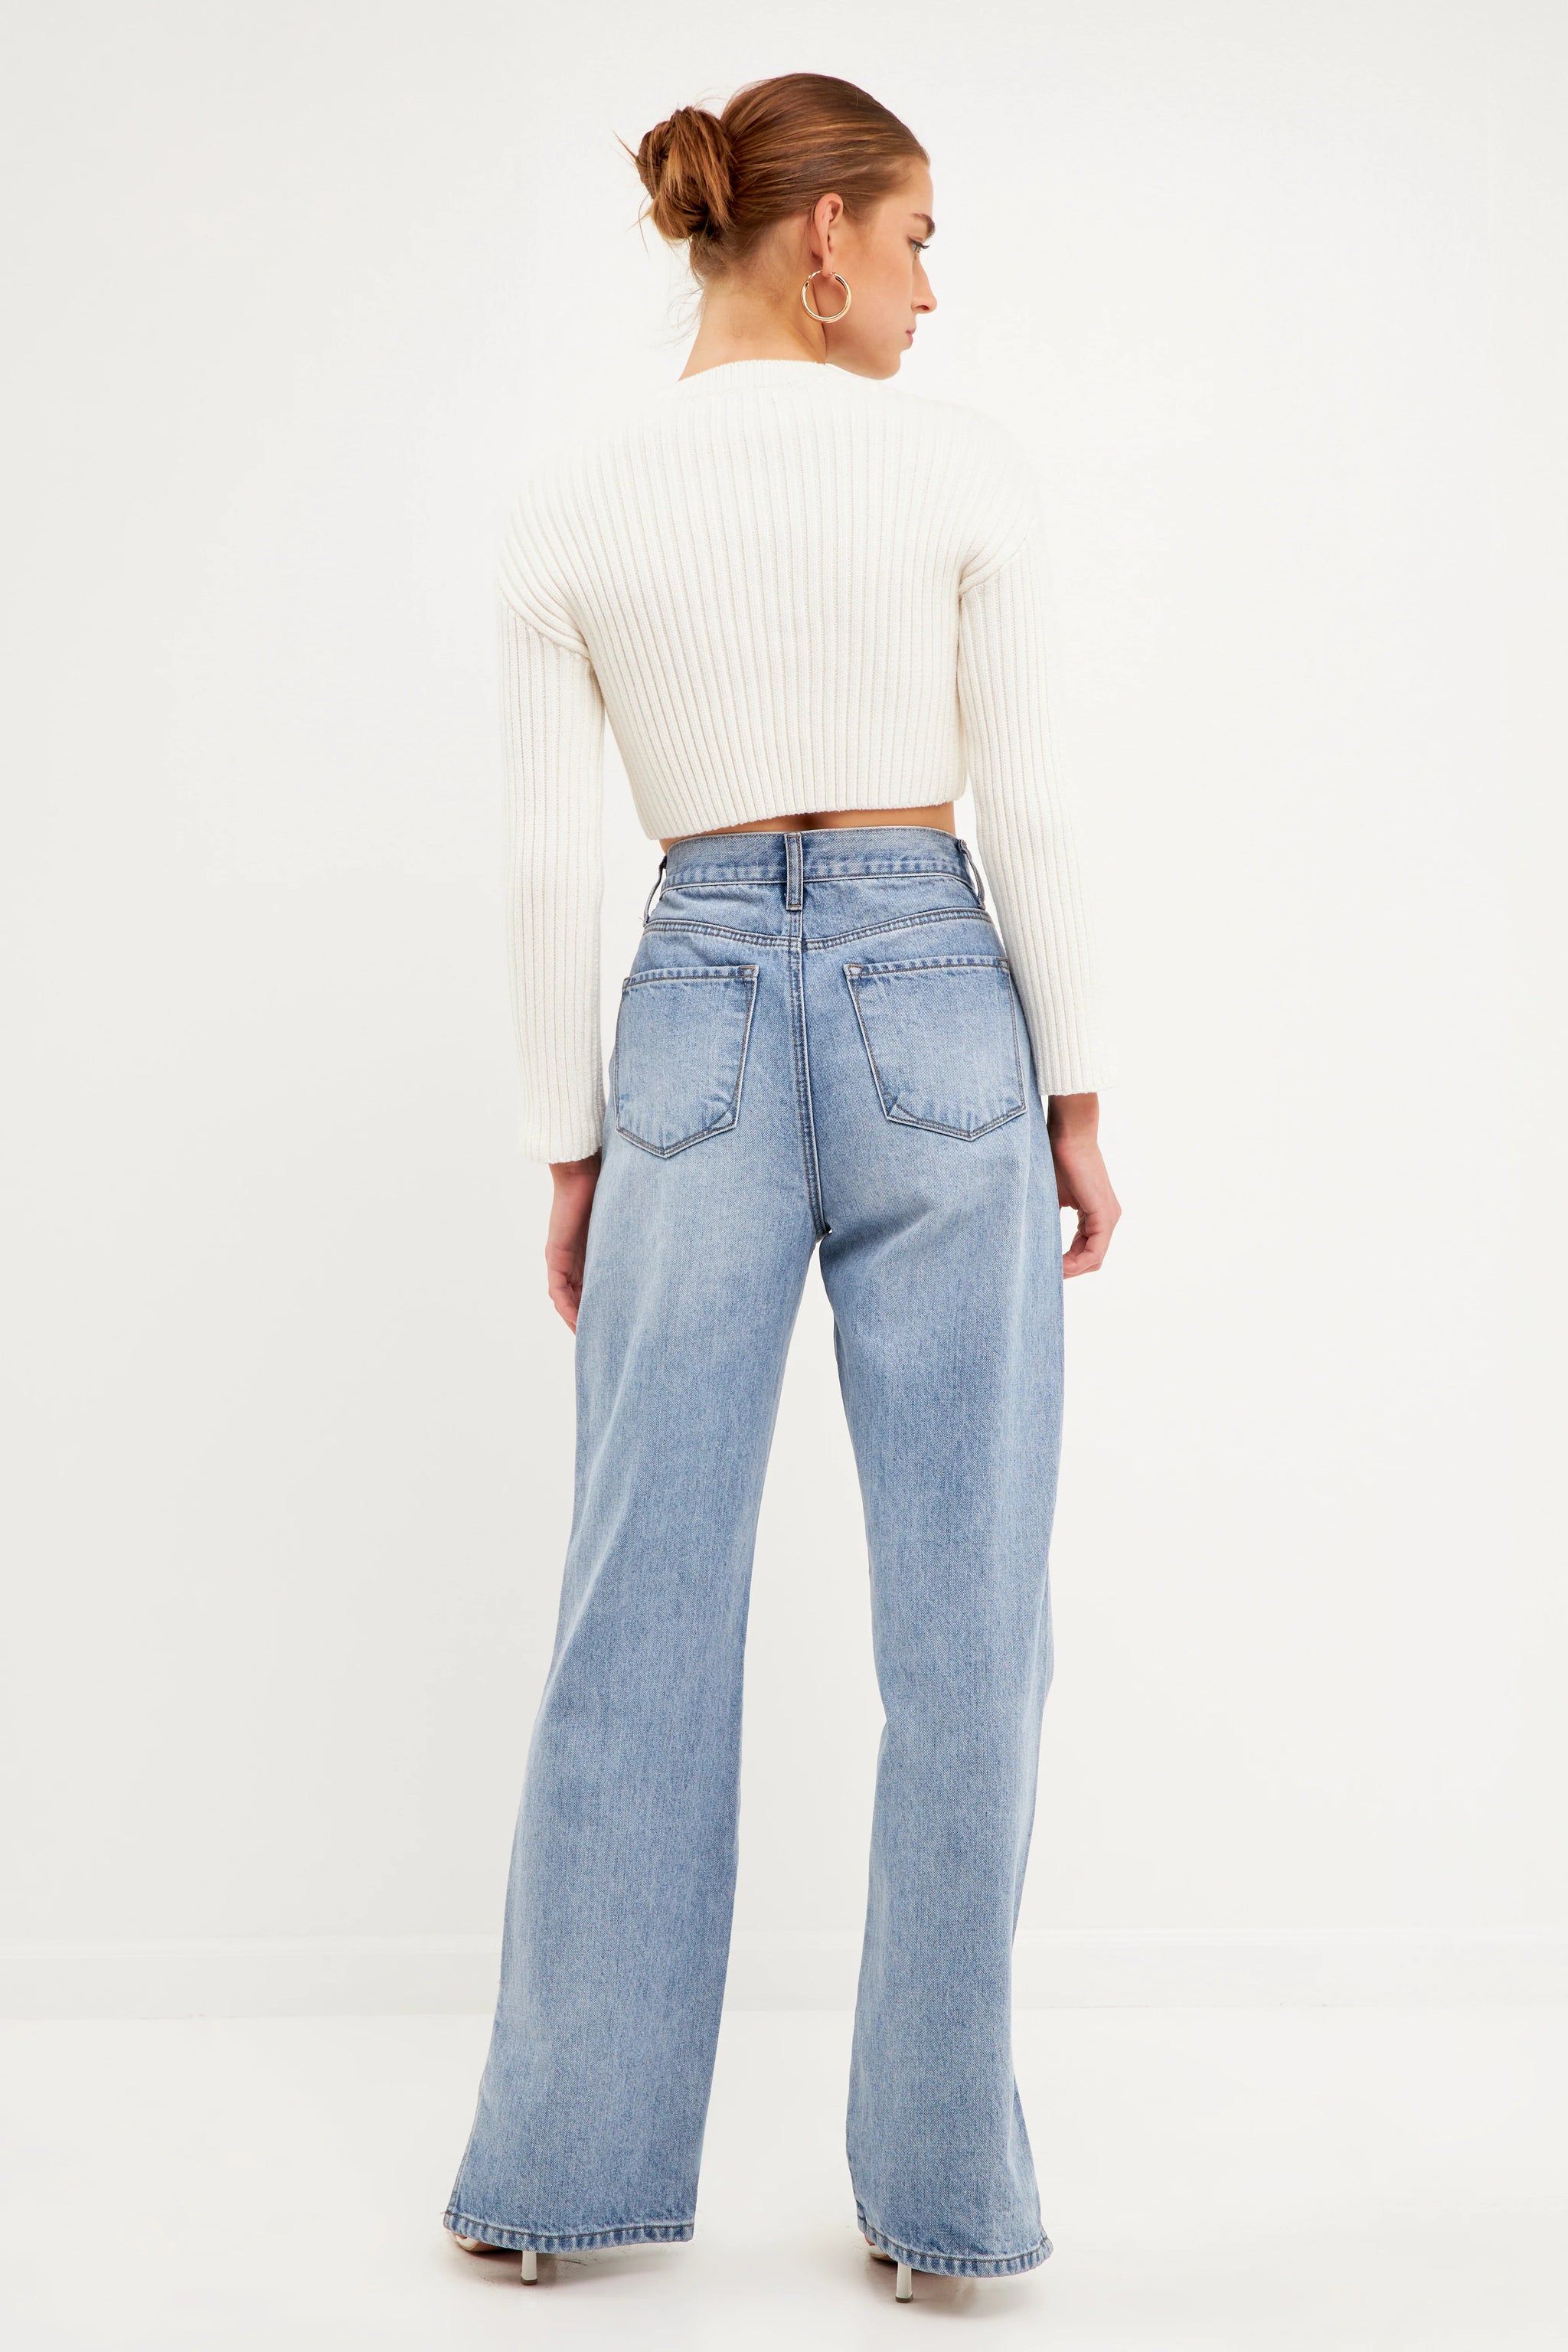 CROPPED RIBBED KNIT SWEATER | HARRINGTONS